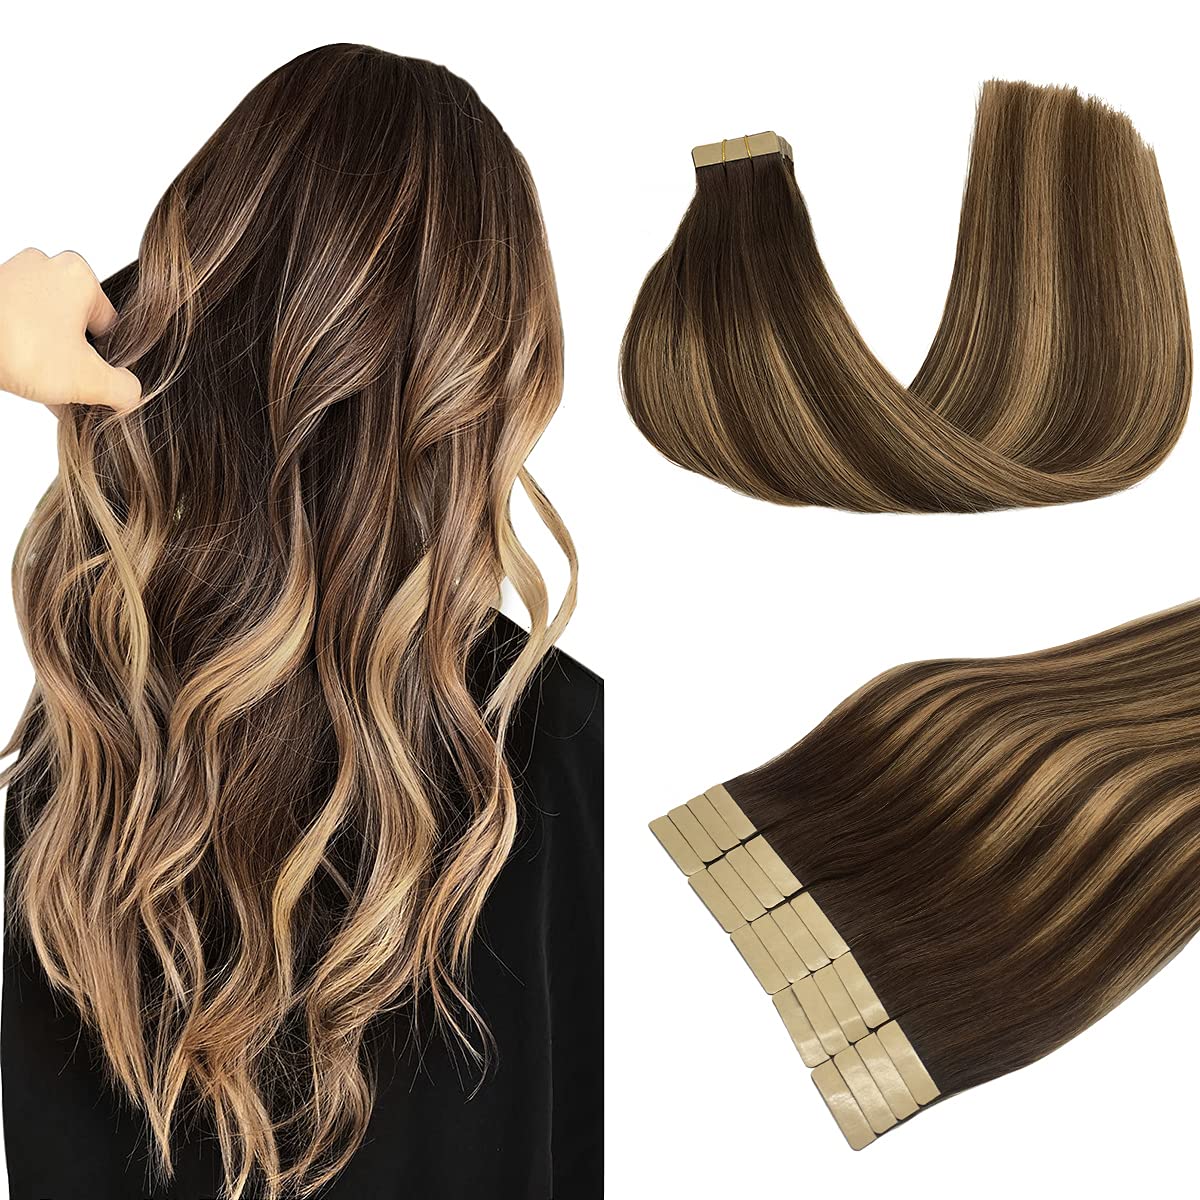 DOORES Hair Extensions Tape in Human Hair Balayage [...]